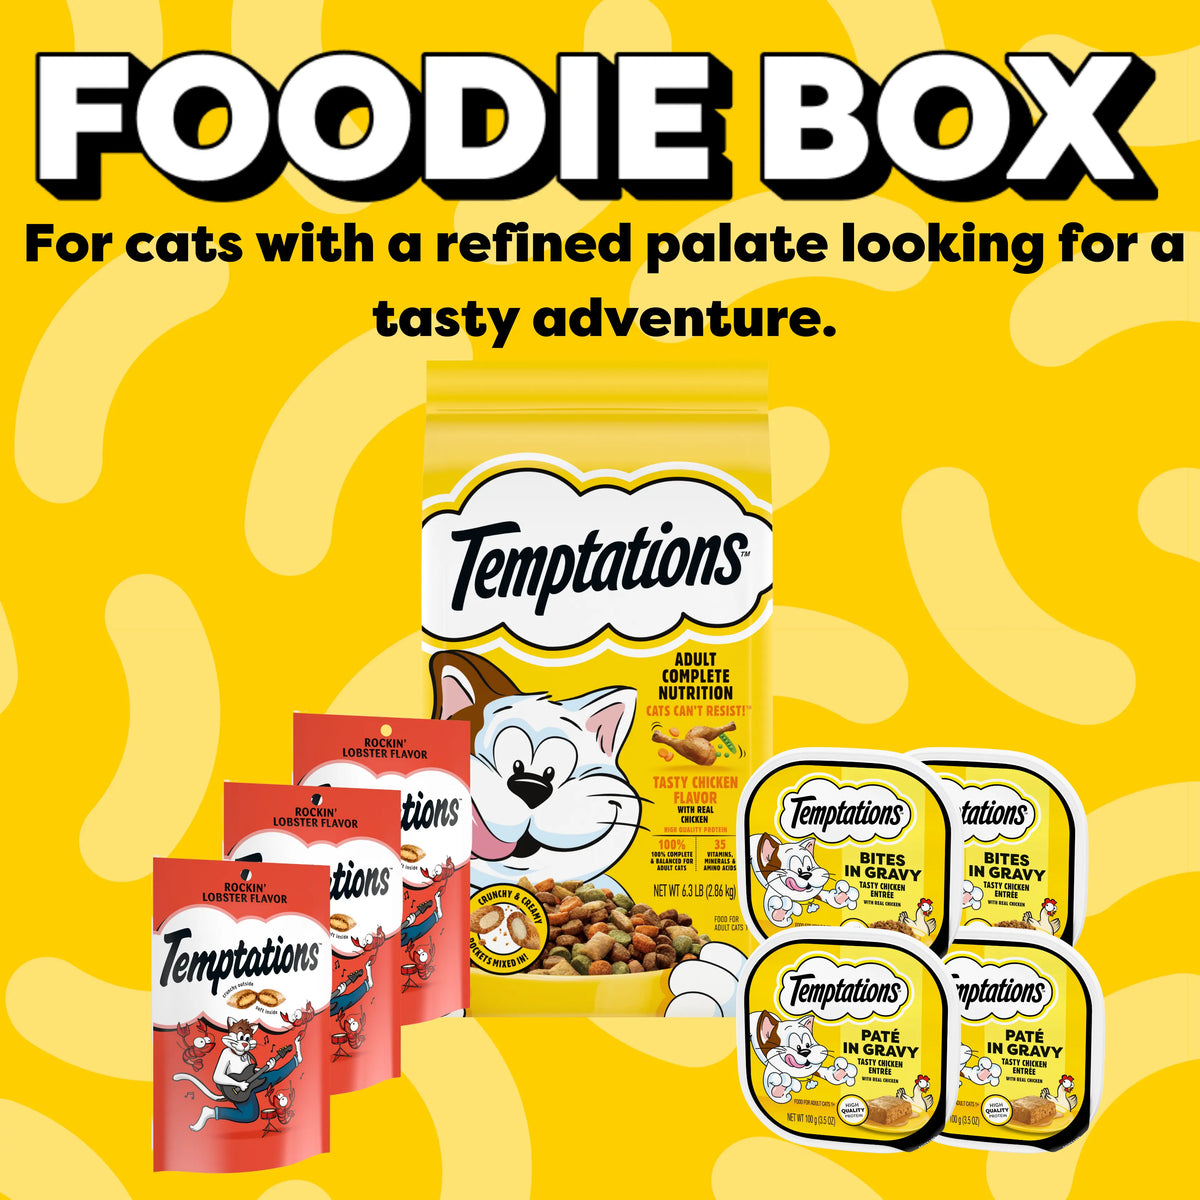 Temptations Foodie Box Yellow Background